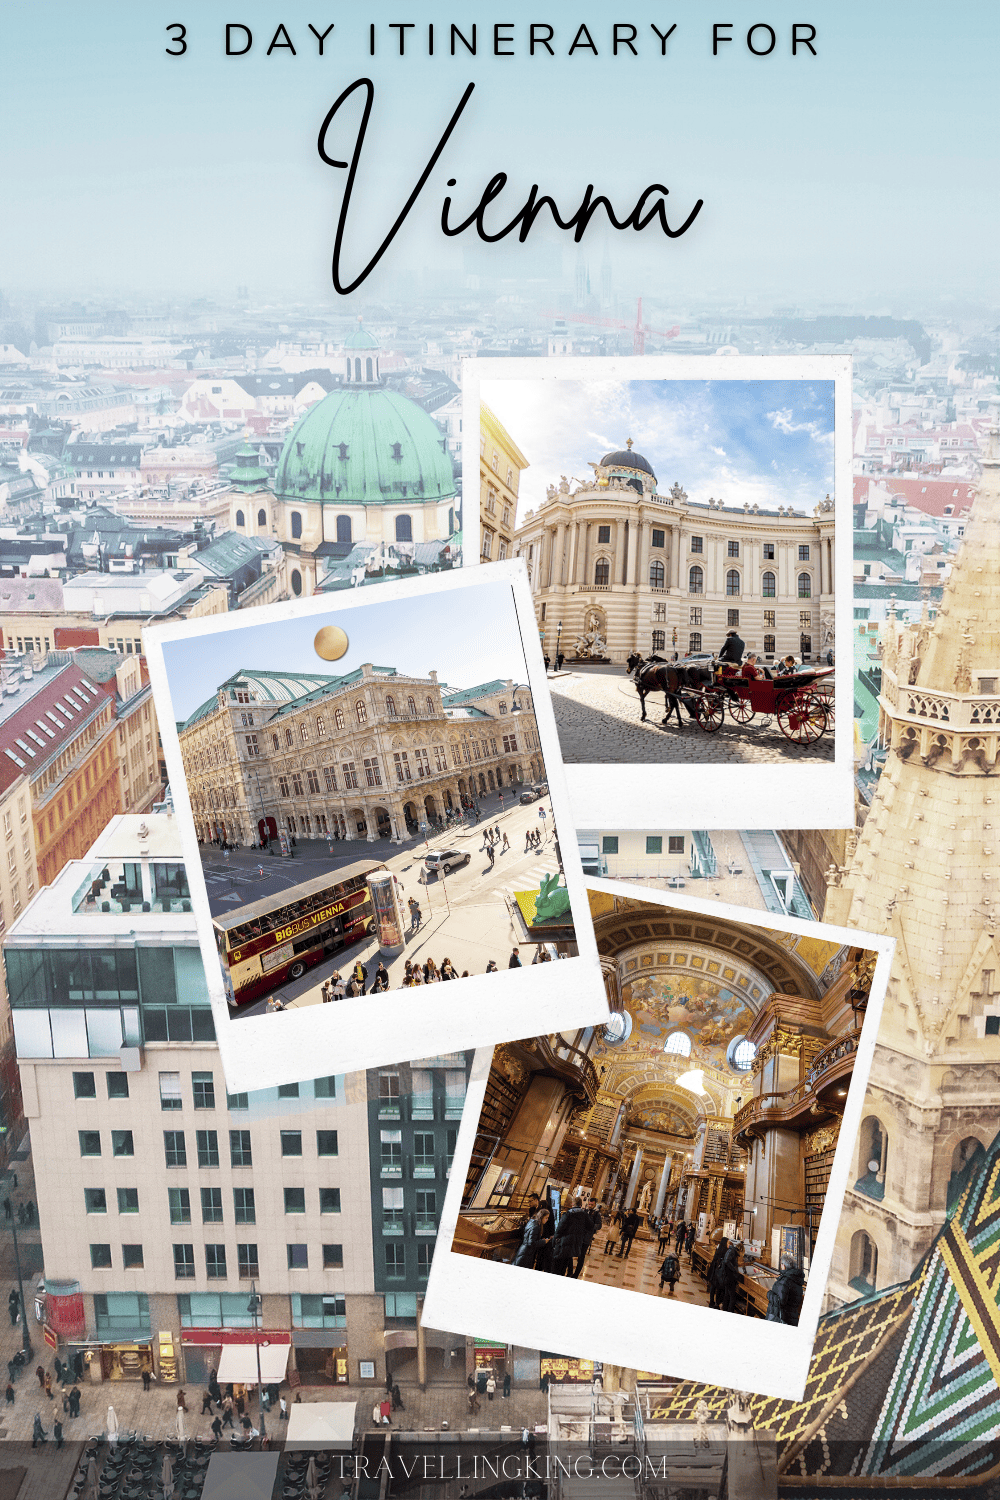 3 day itinerary for Vienna